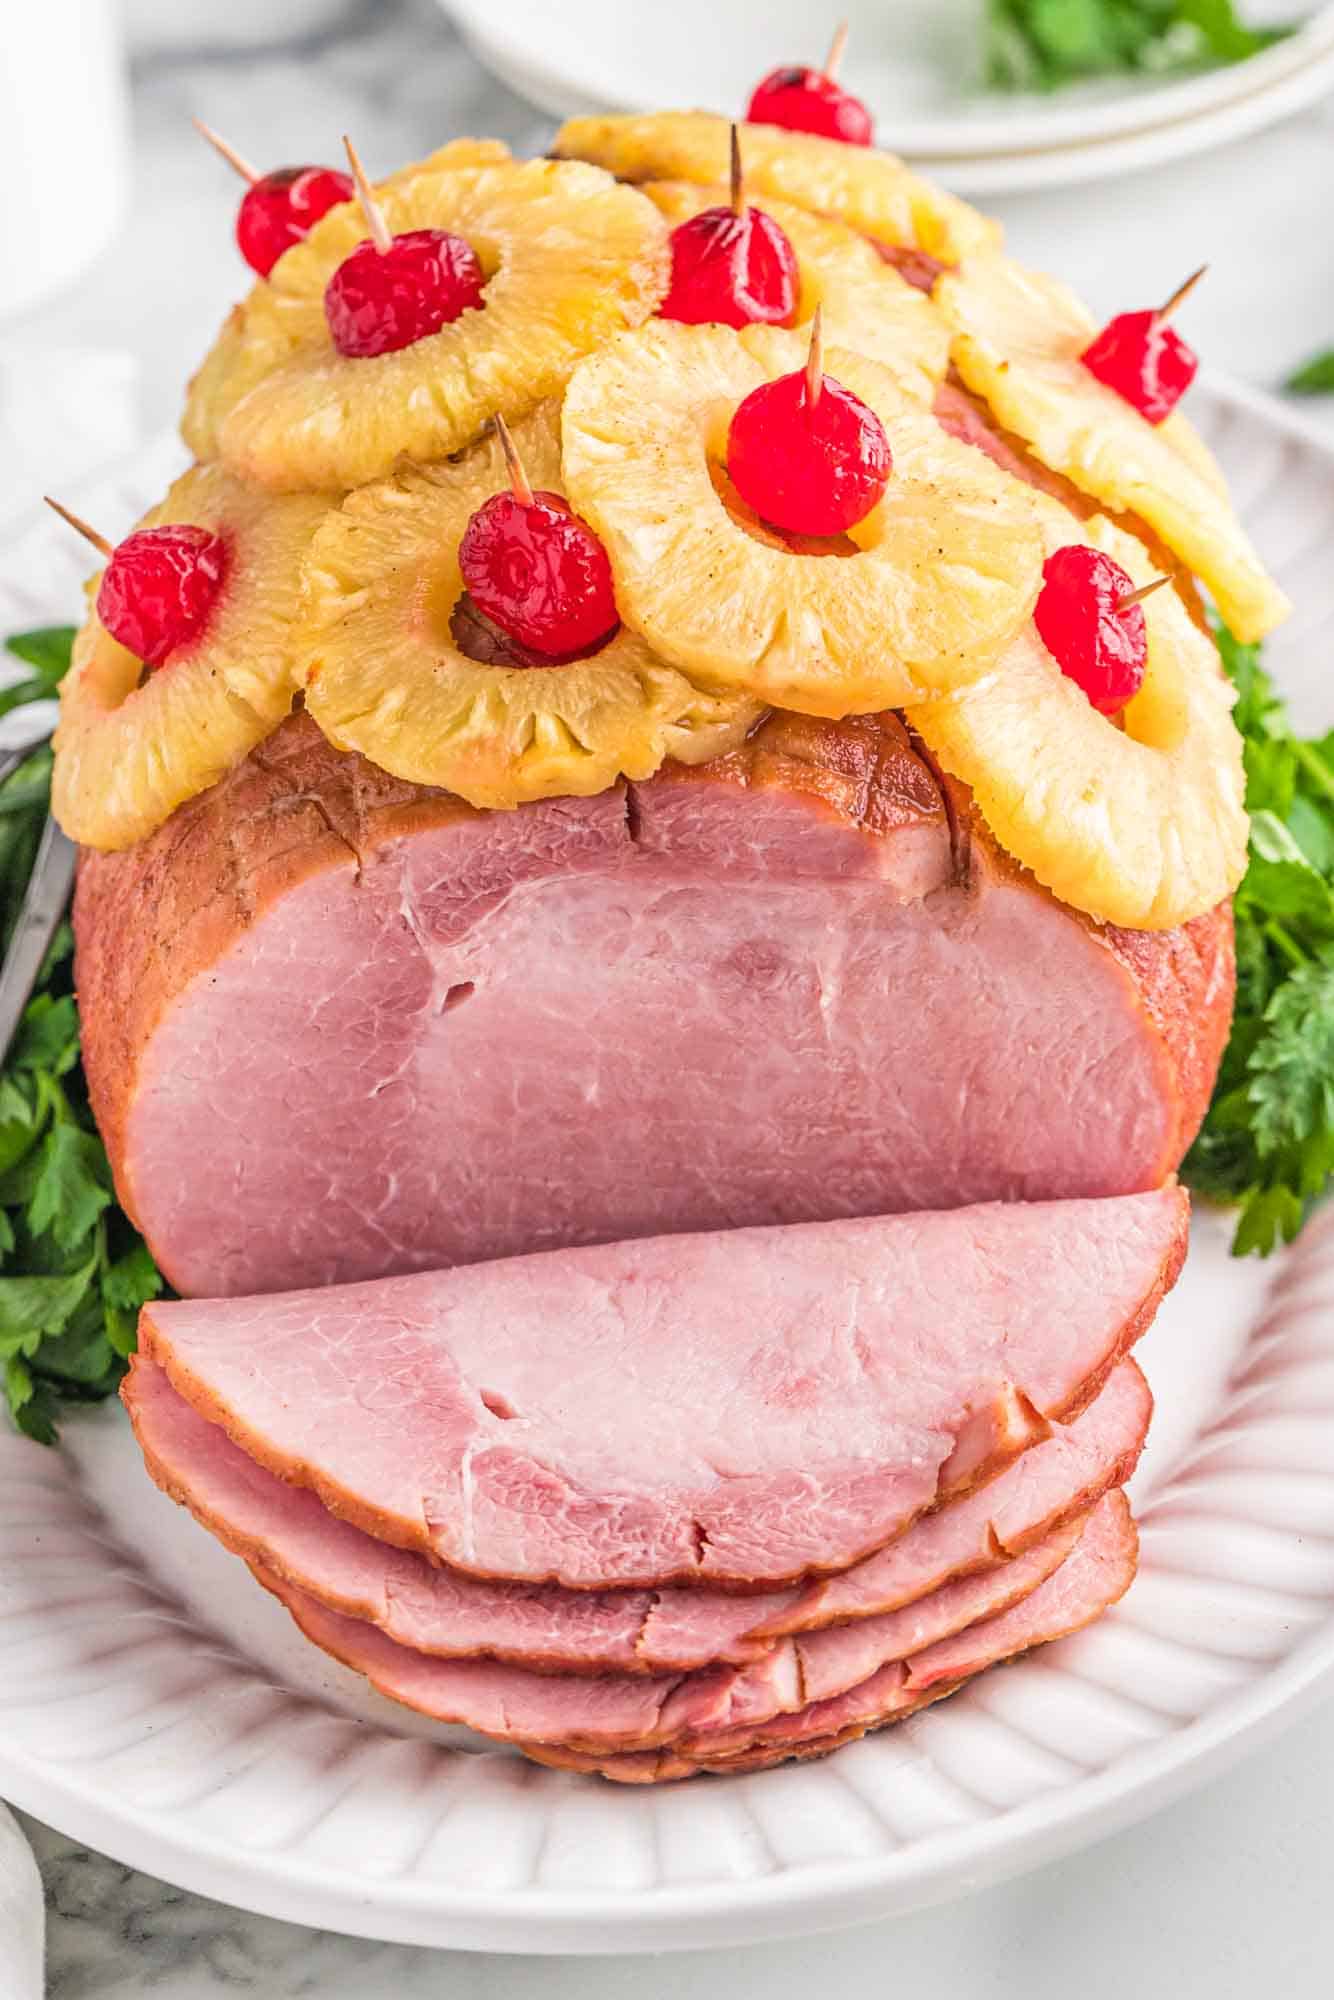 Sliced pineapple ham served on a white plate